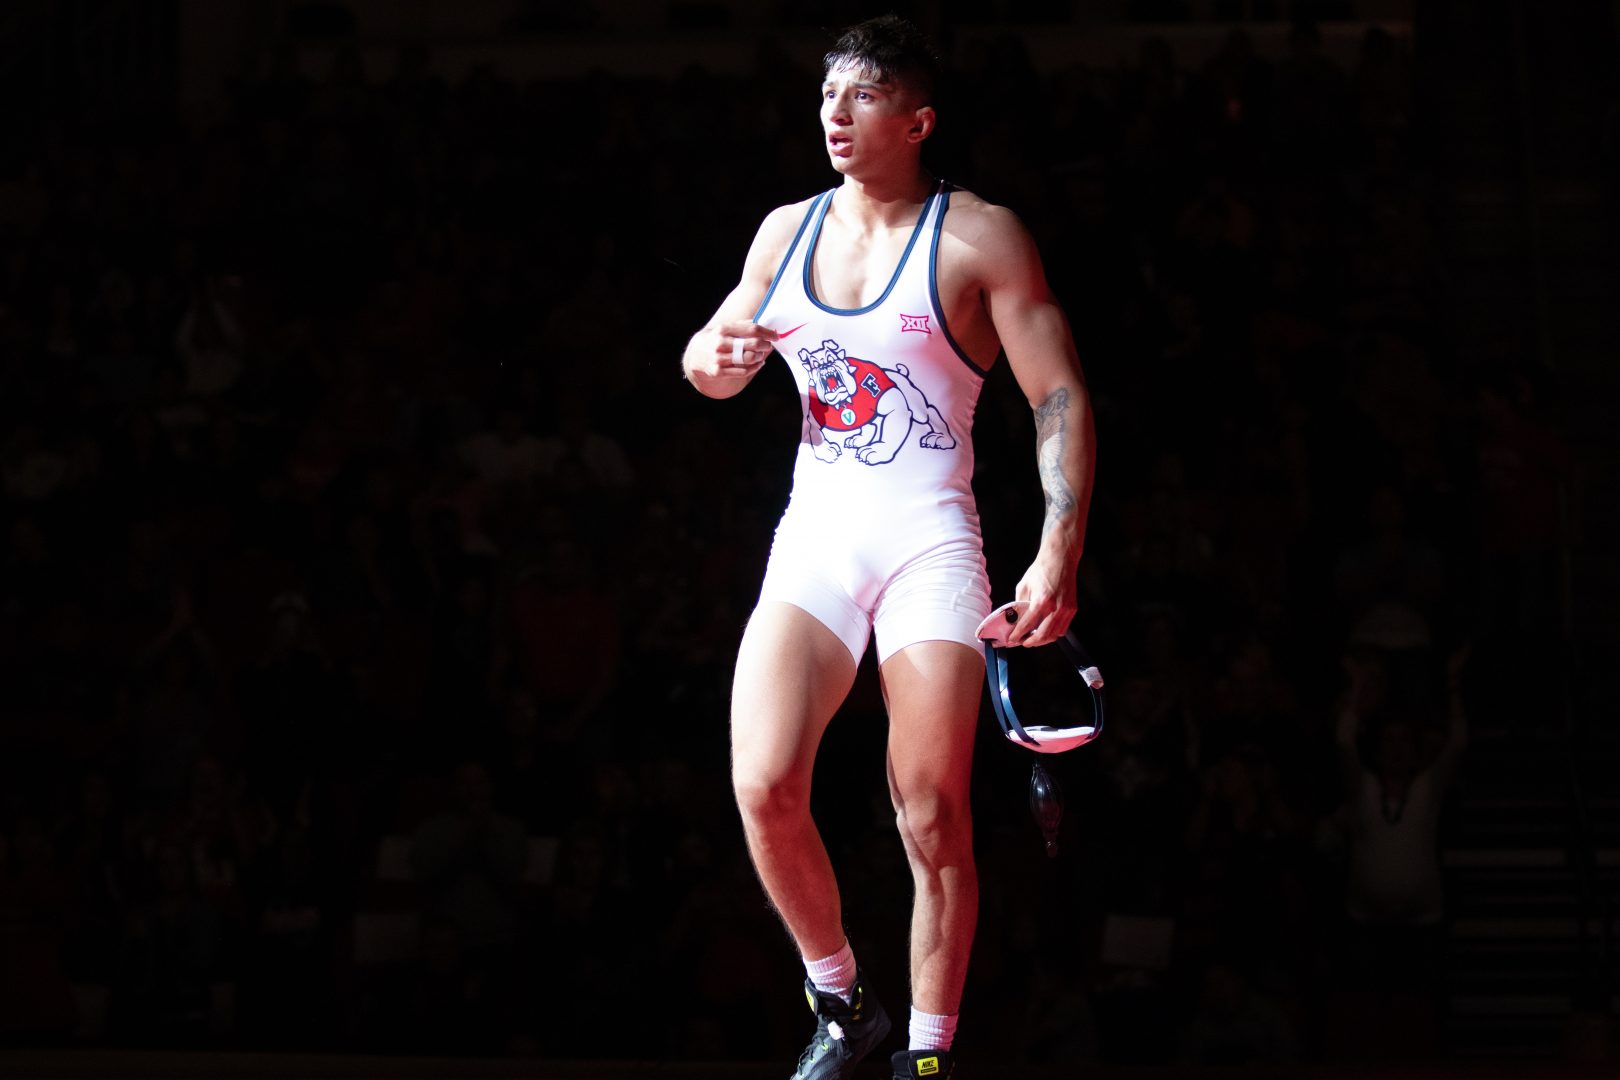 Greg Gaxiola improves to 3-1 this season while getting the Bulldogs’ most dominant decision of the season against Rutgers’ Gerald Angelo on Friday, November 15, 2019 at the Save Mart Center. (Armando Carreno/The Collegian)